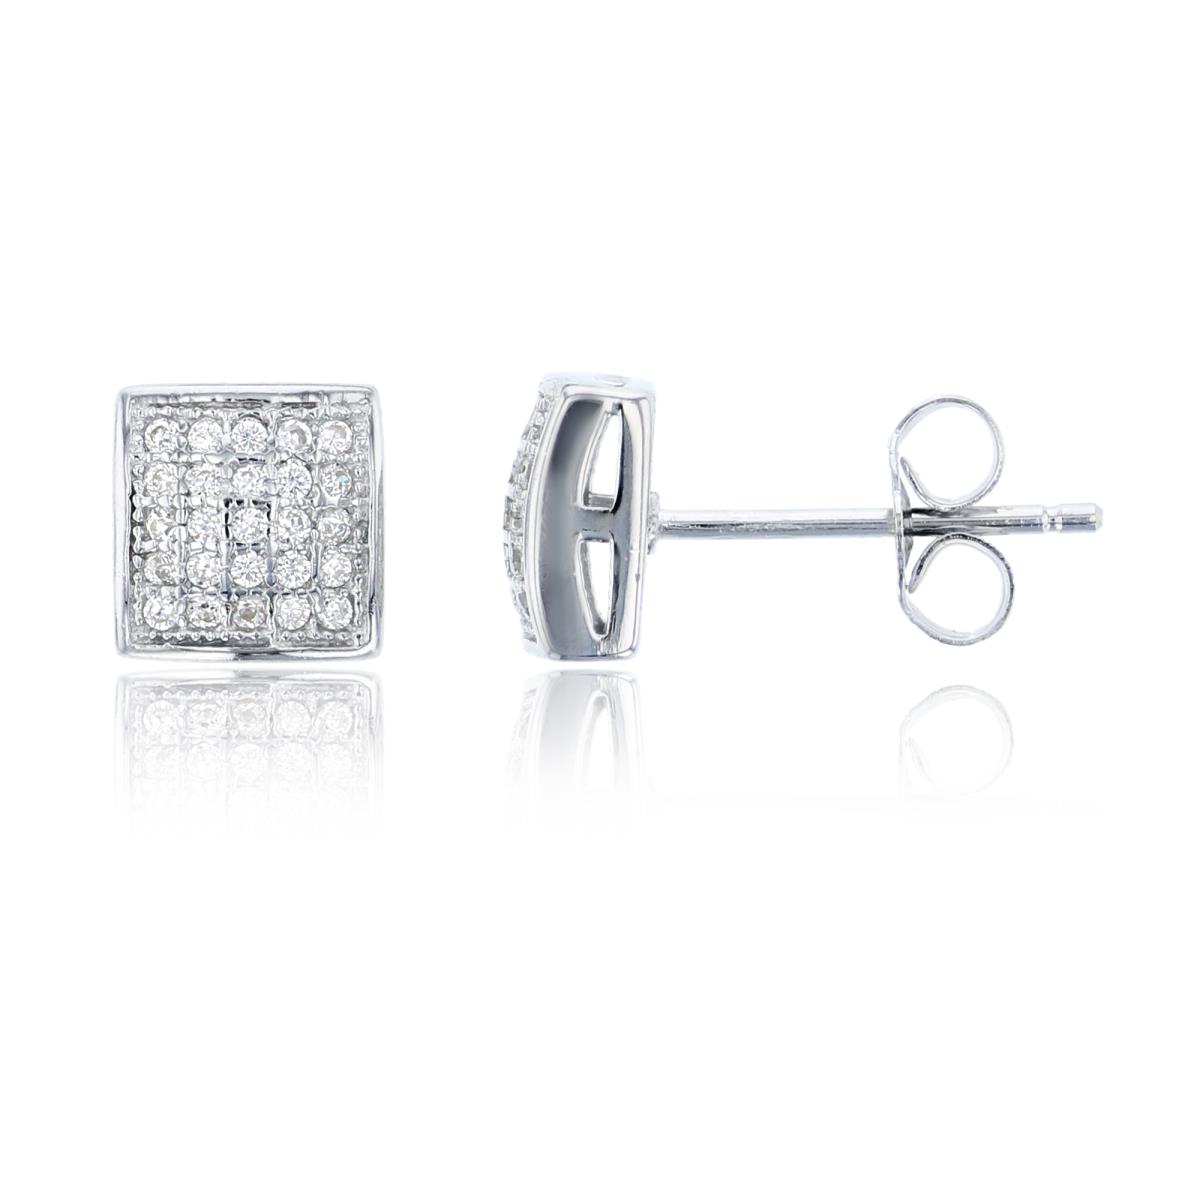 Sterling Silver 8mm  Micropave Domed Square Stud Earring